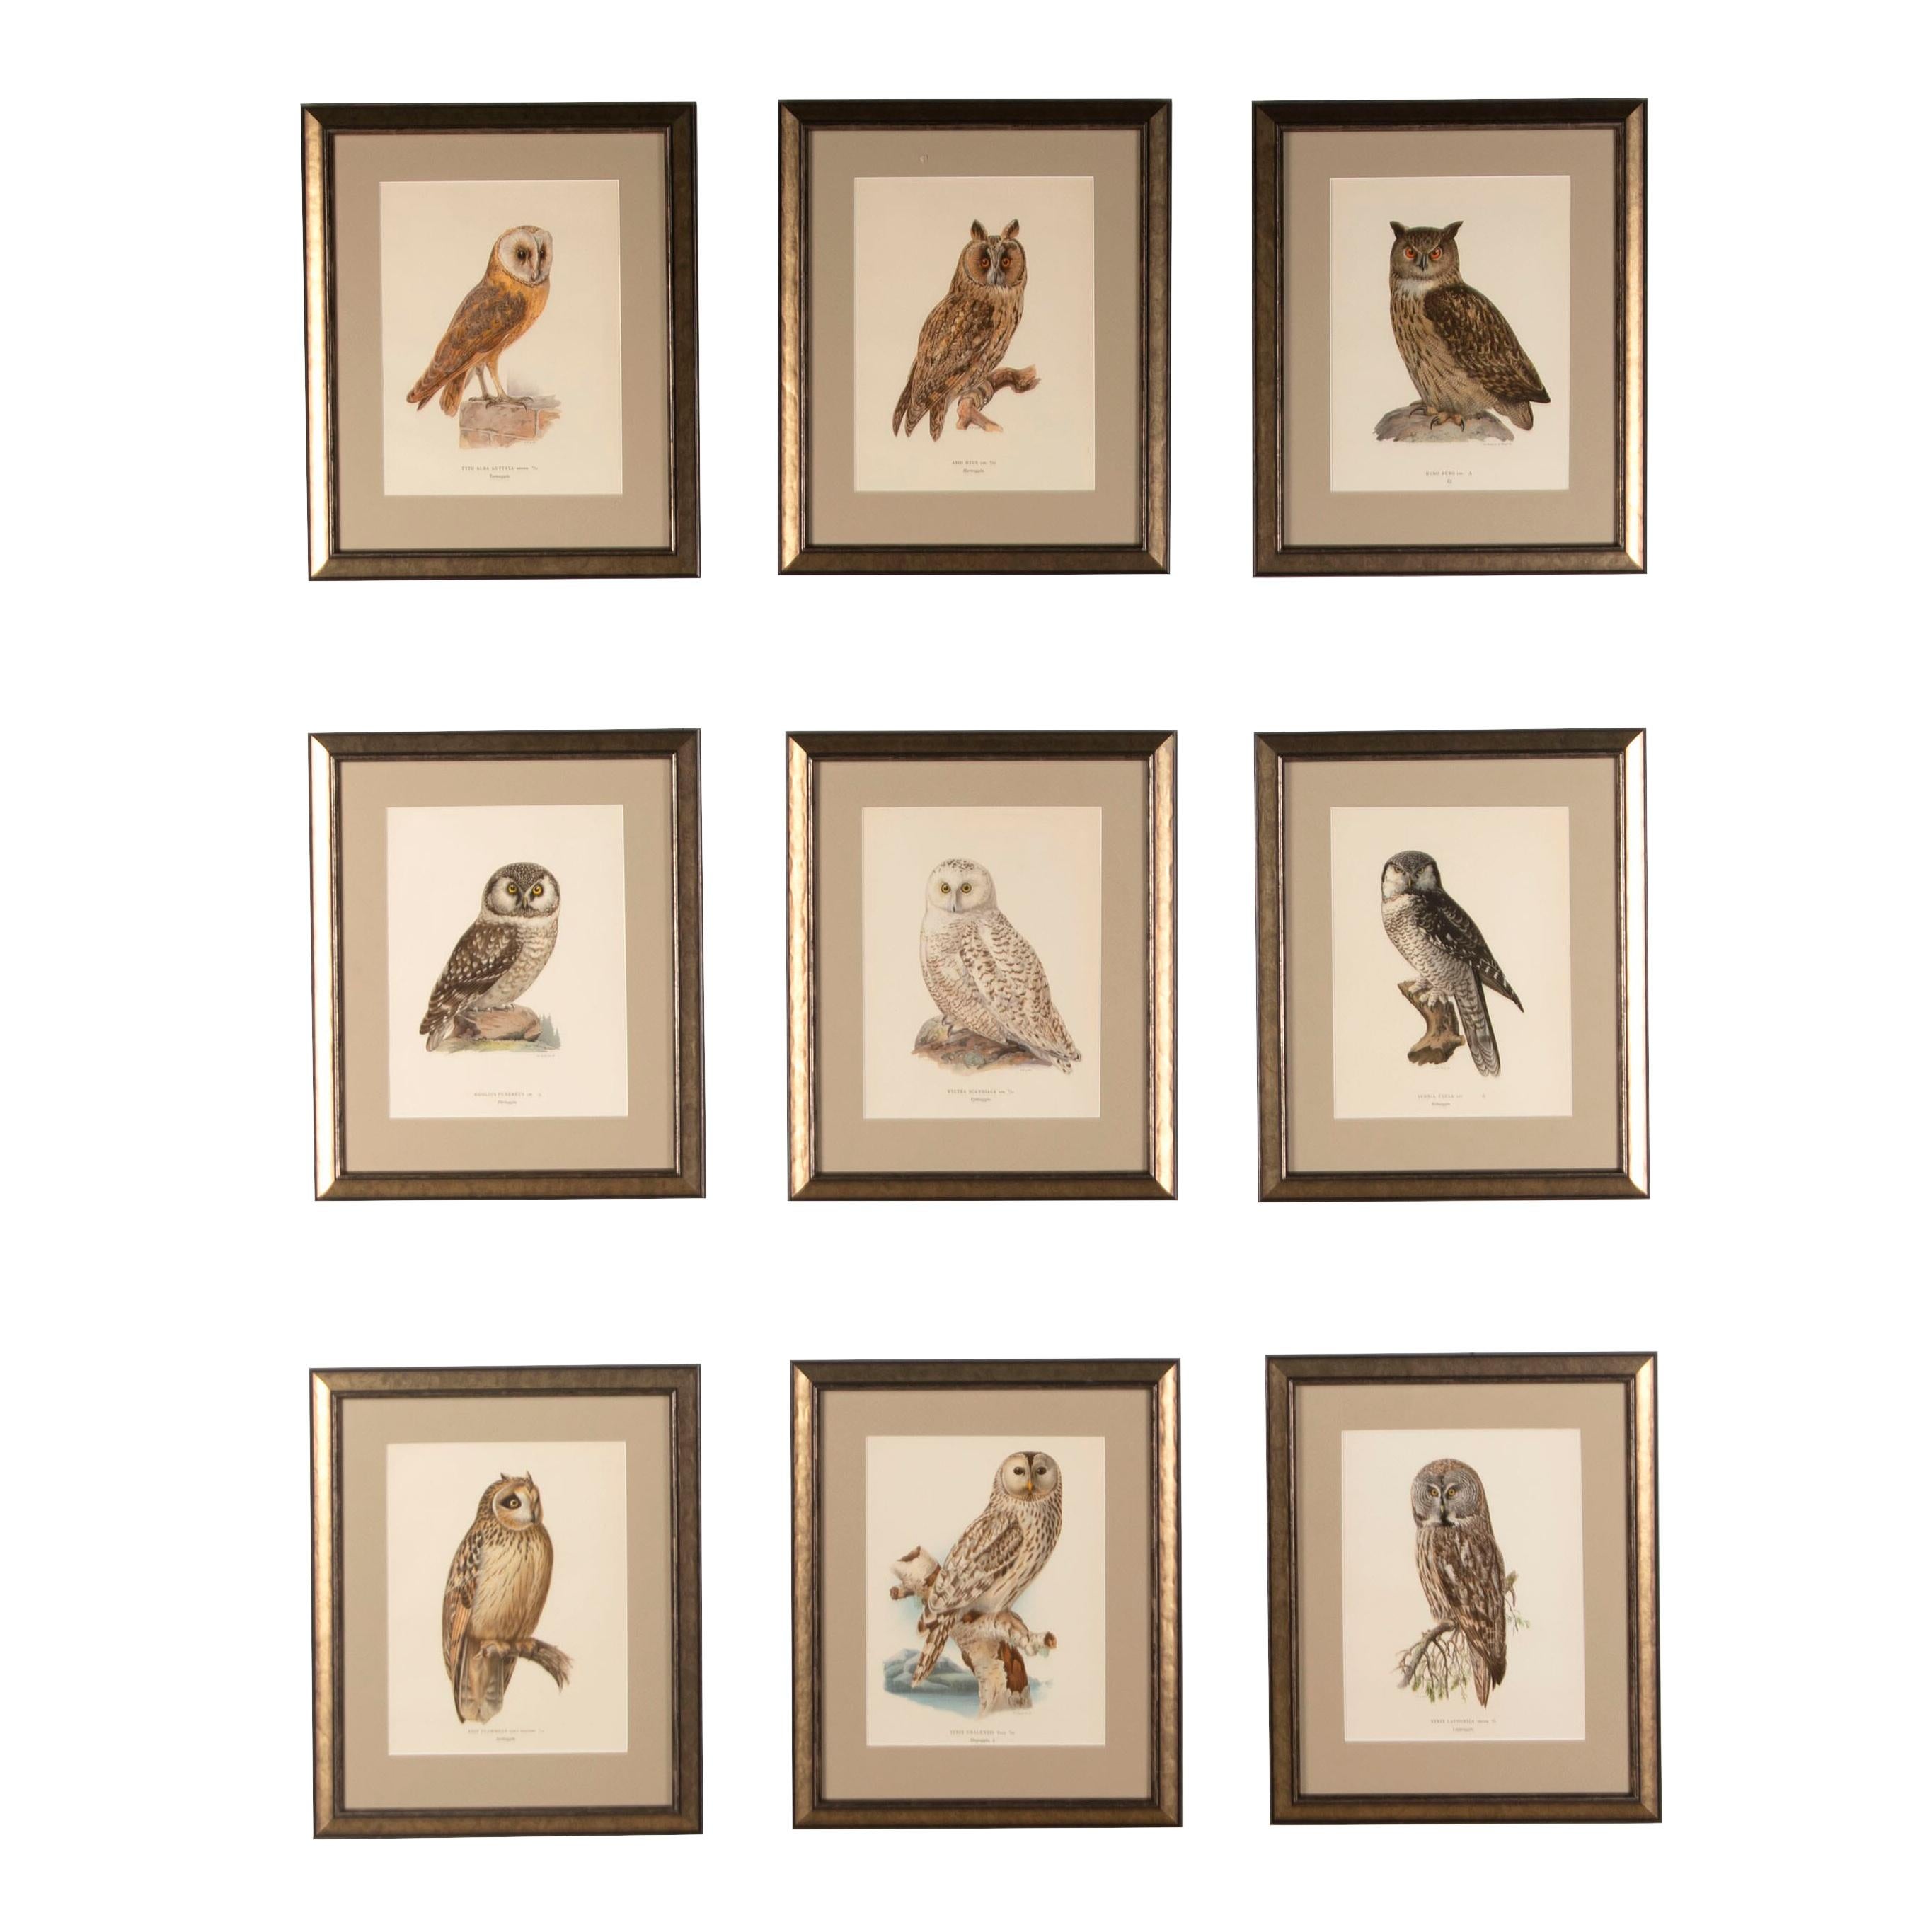 Collection of Swedish owls by the Finnish artist Magnus von Wright and Wihelm von Wright who were well-known artist and ornithologists.They captured details and colours not previously seen .These colourful chromolithographs were produced around 1920